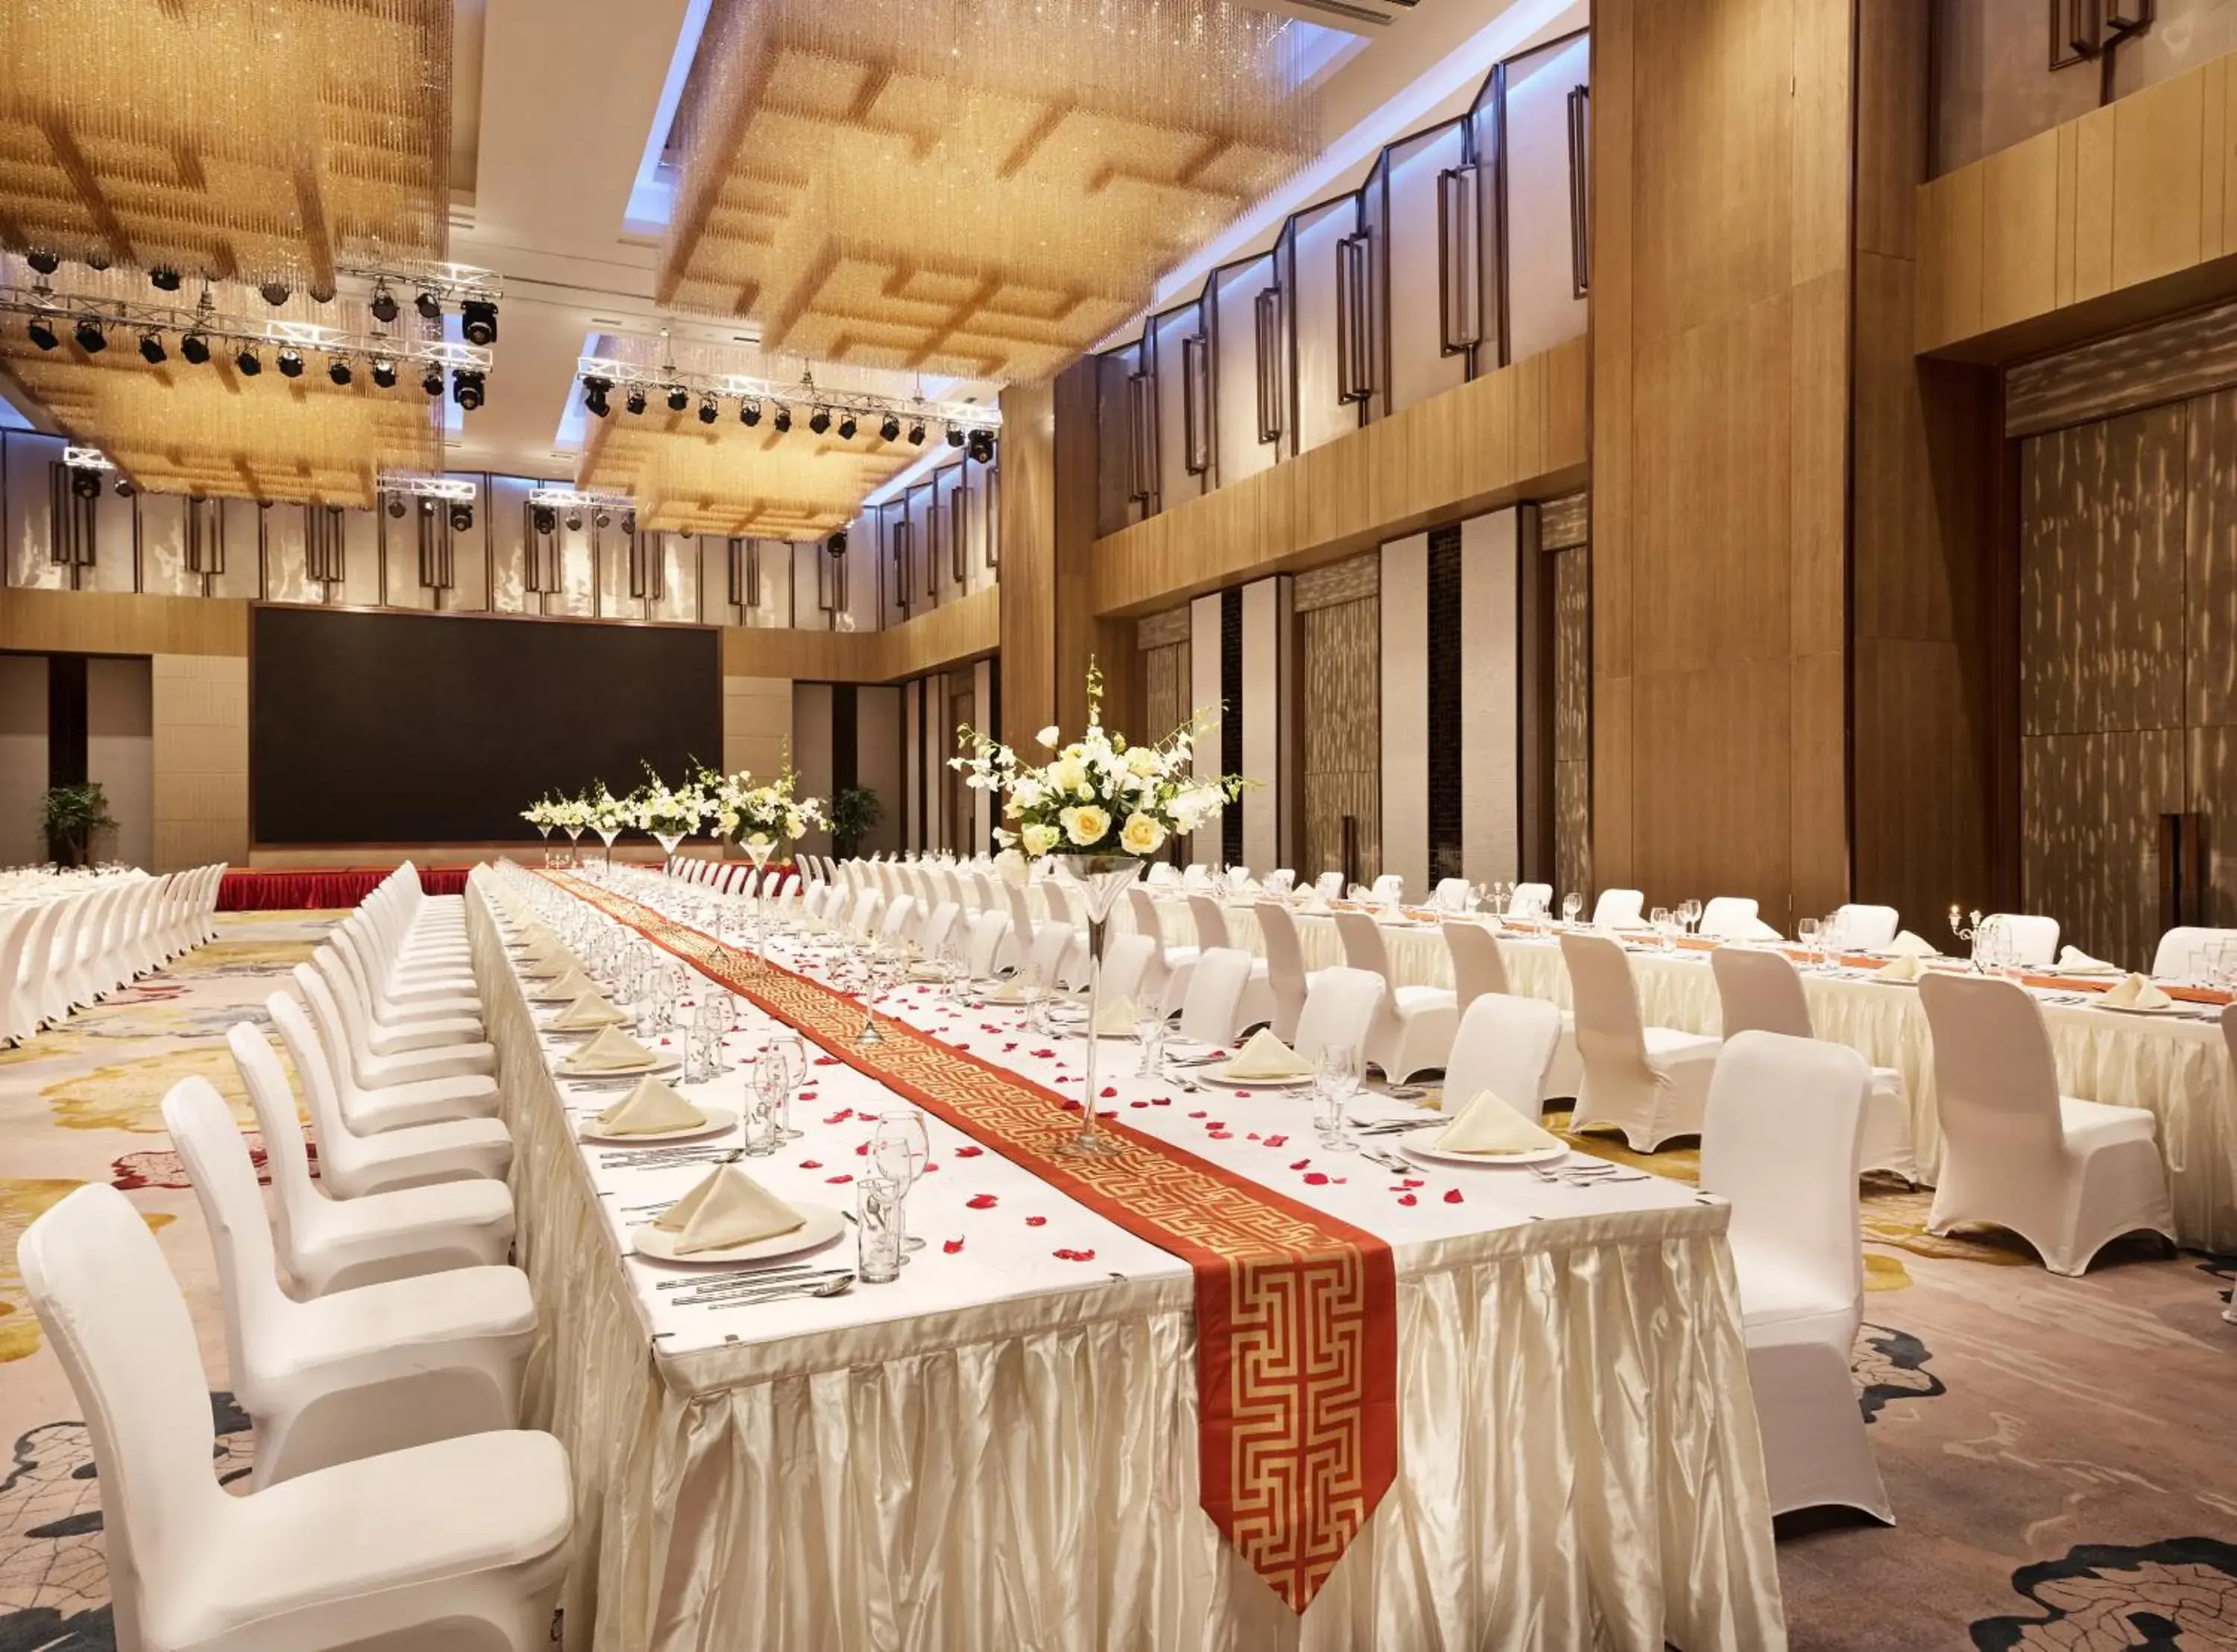 Banquet/Function facilities, Banquet Facilities in Hualuxe Wuhu